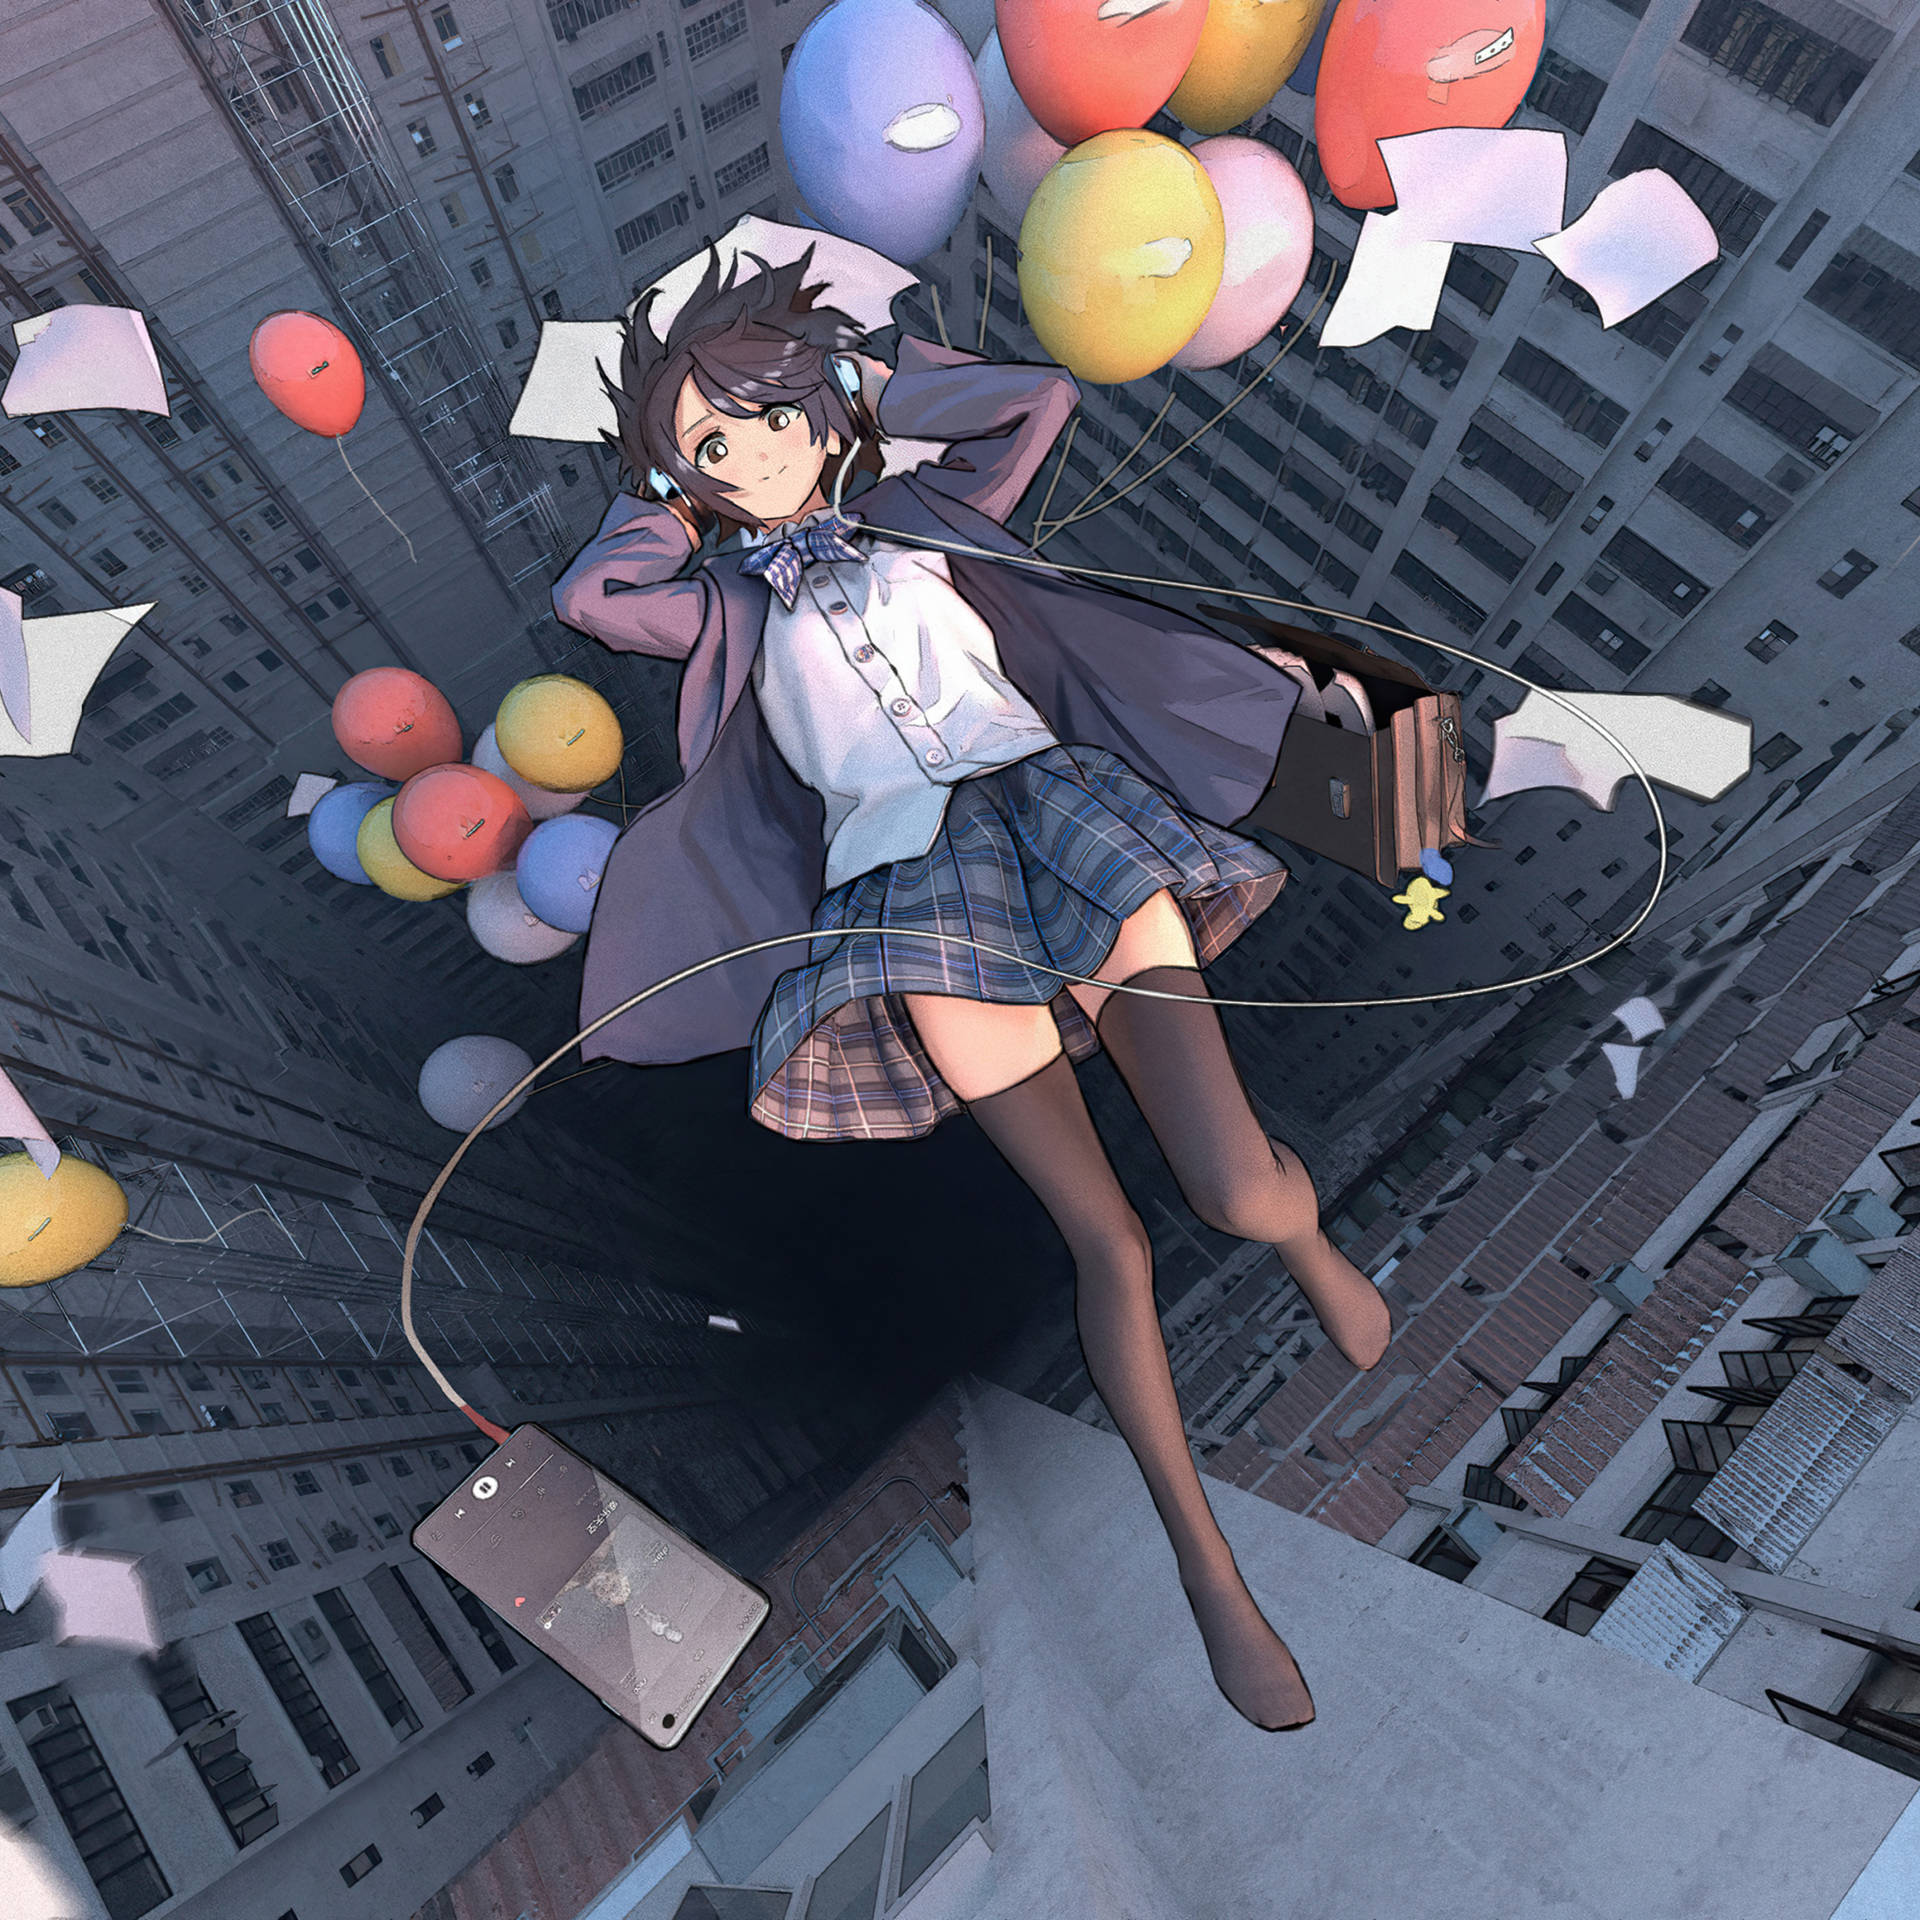 Anime Ipad Falling Girl With Balloons Background